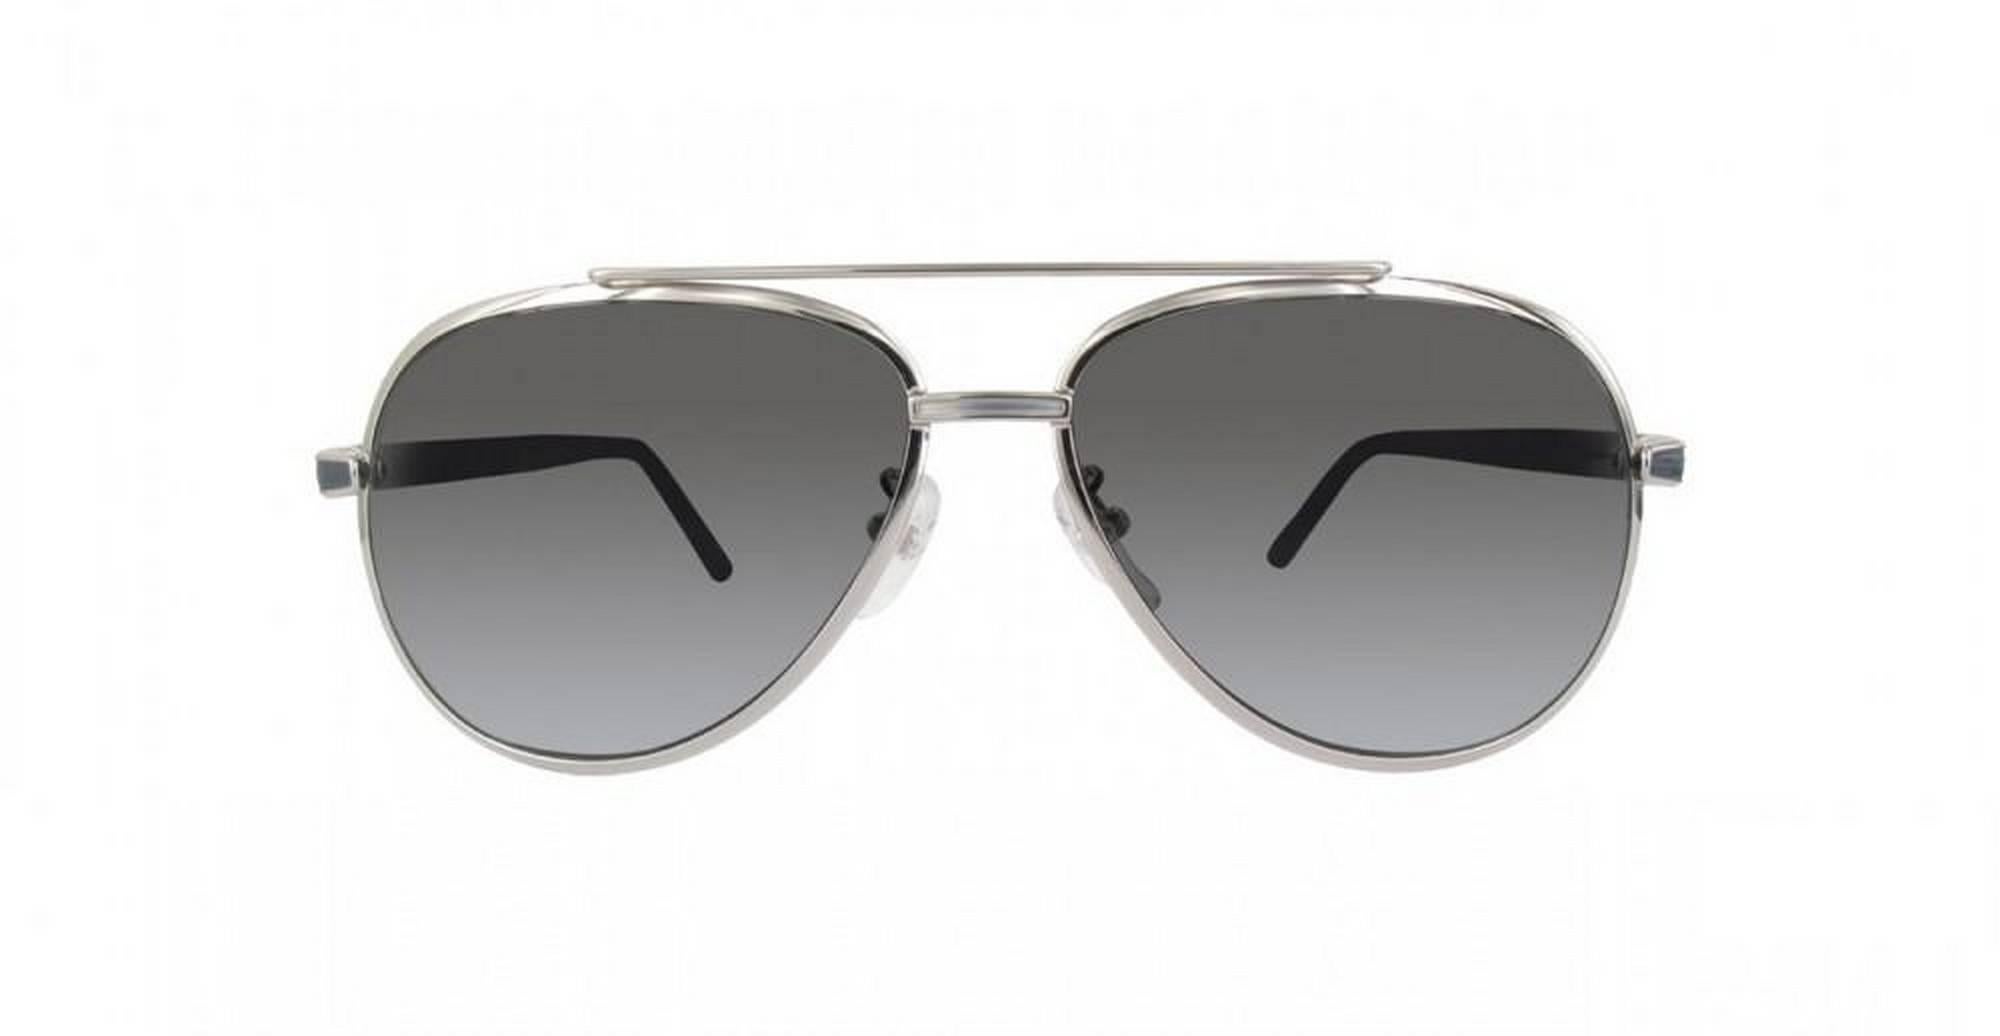 Montblanc MB508T-16A-61 Metal Shiny Palladium - Smoke Sunglasses
Brand: Montblanc
Style Code: MB508T-16A-61
Frame: Metal
Color: Shiny Palladium - Smoke
Brand new condition. 
Original case and cloth included. 
Made in Italy.